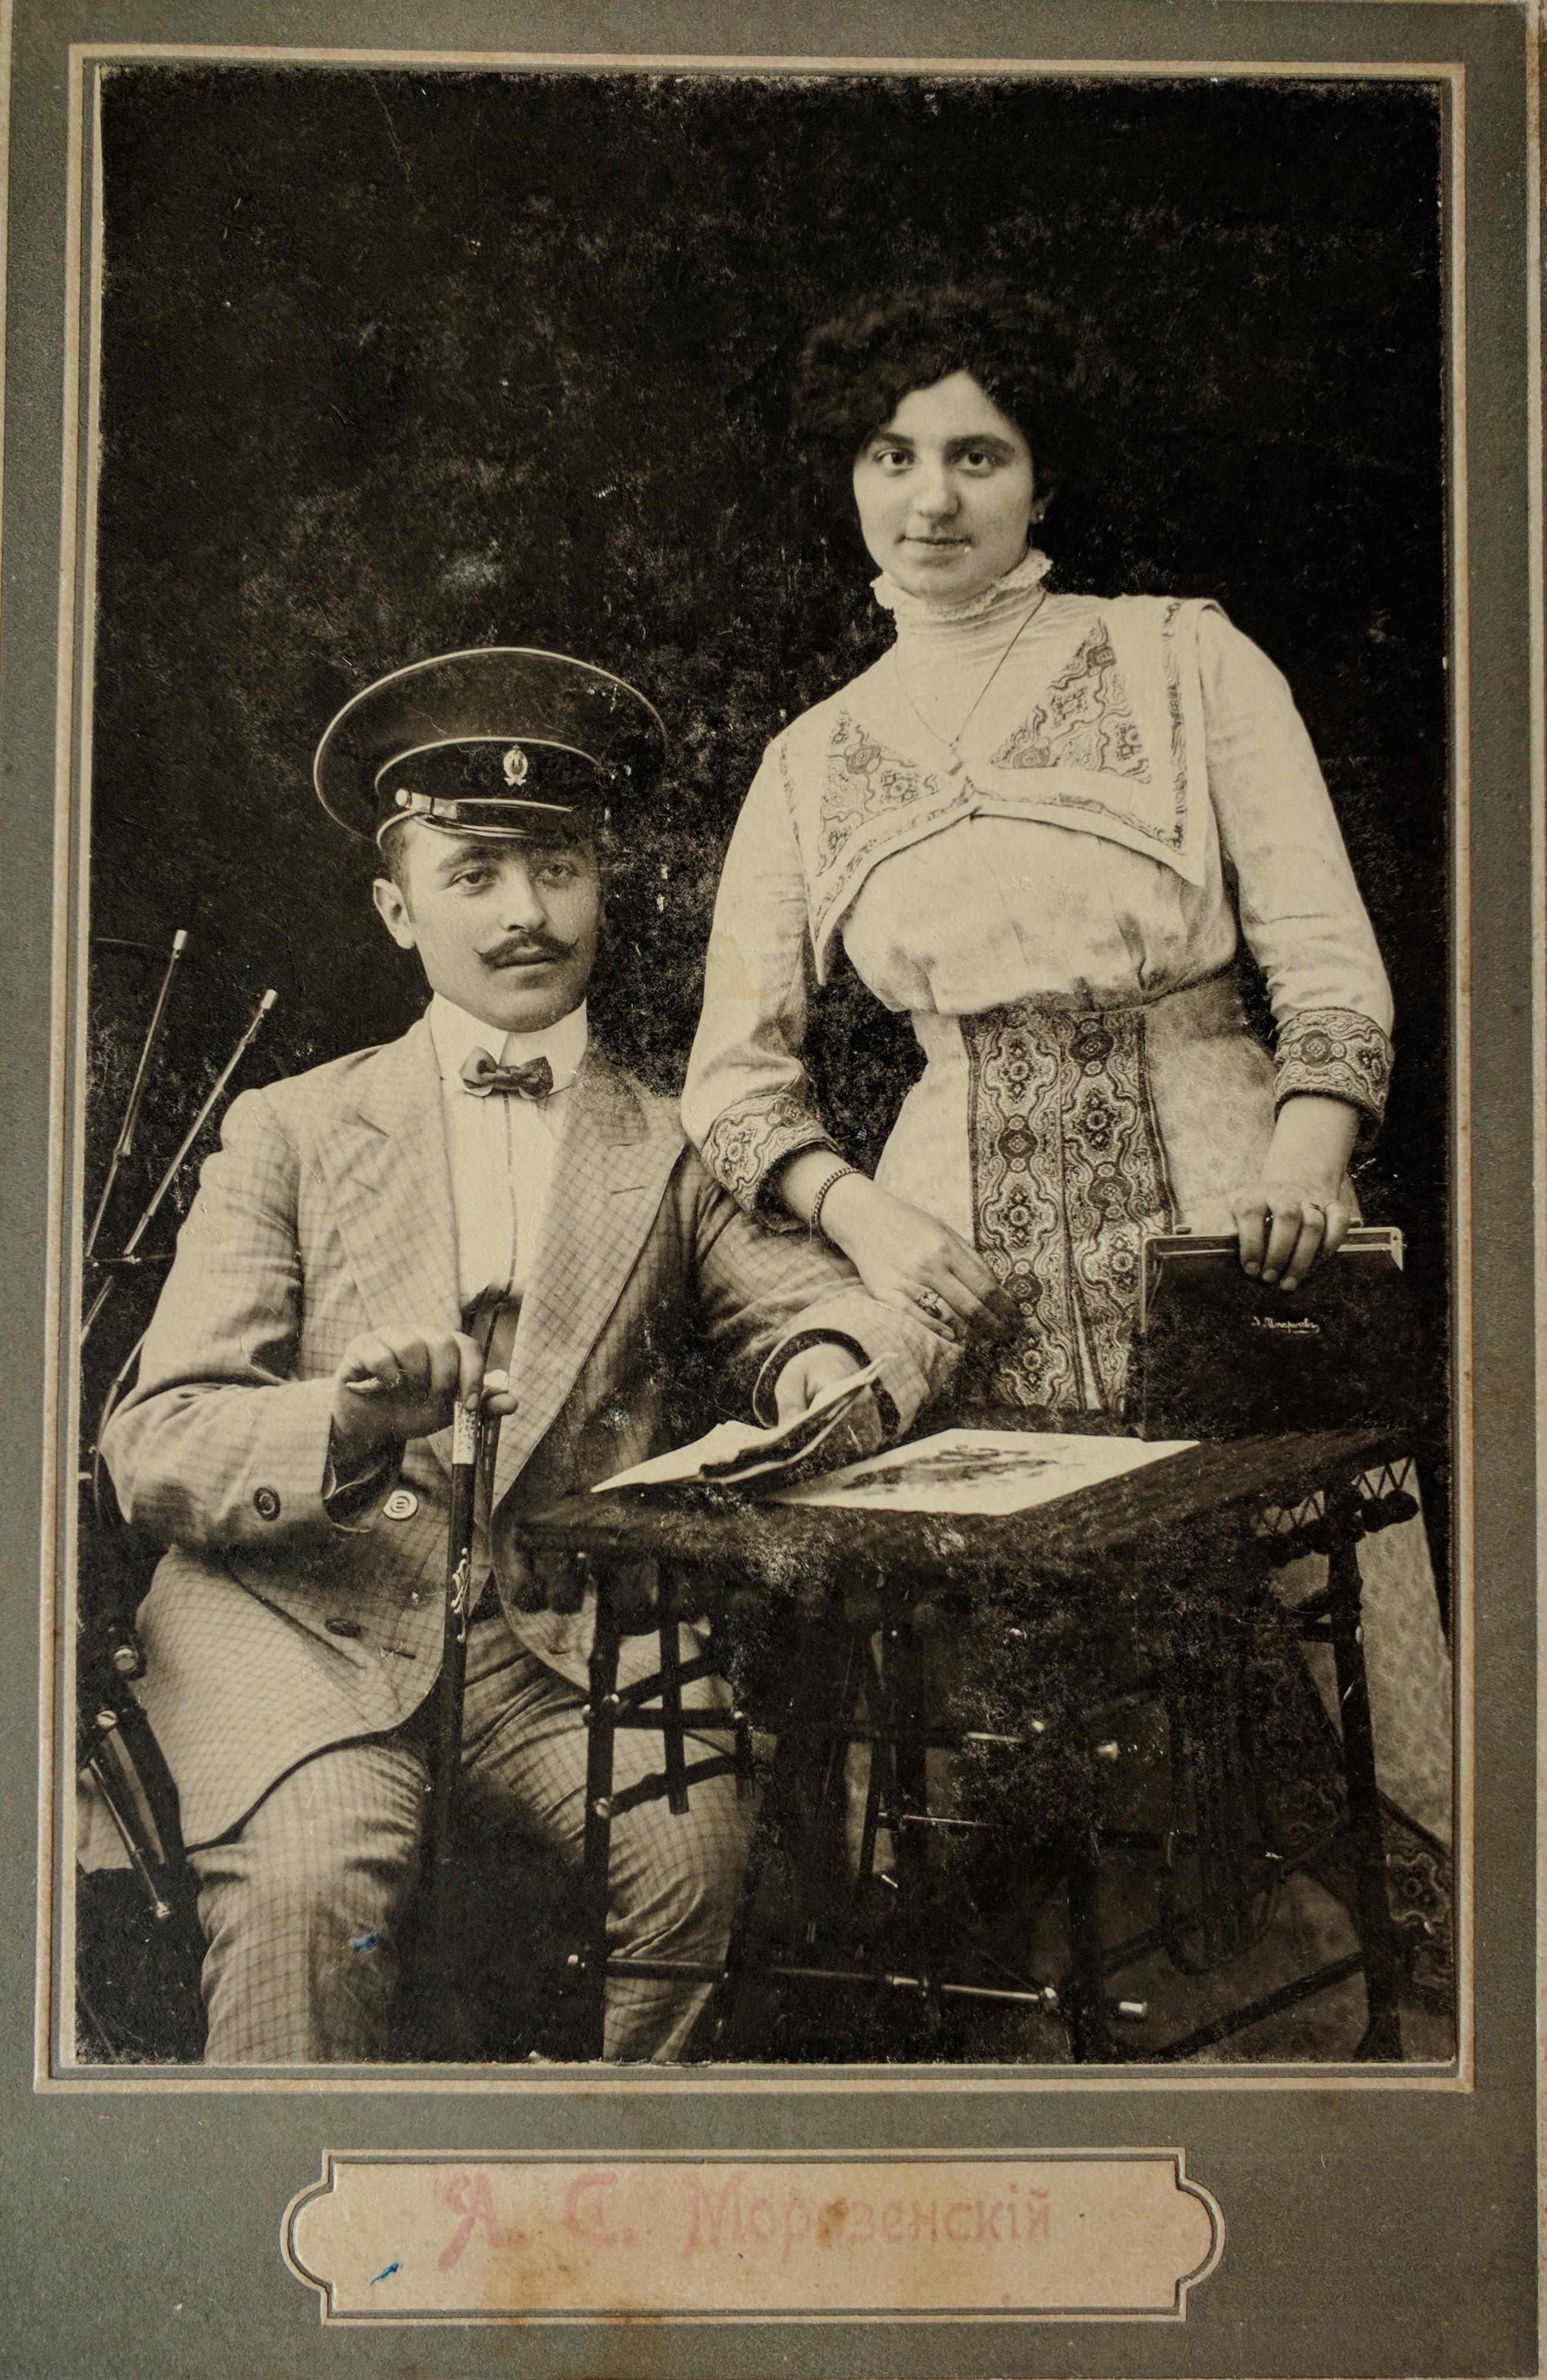 My grandma's grandparents. This is the oldest family photo we have - 1911, Nikolayevsk, Russian Empire.jpg